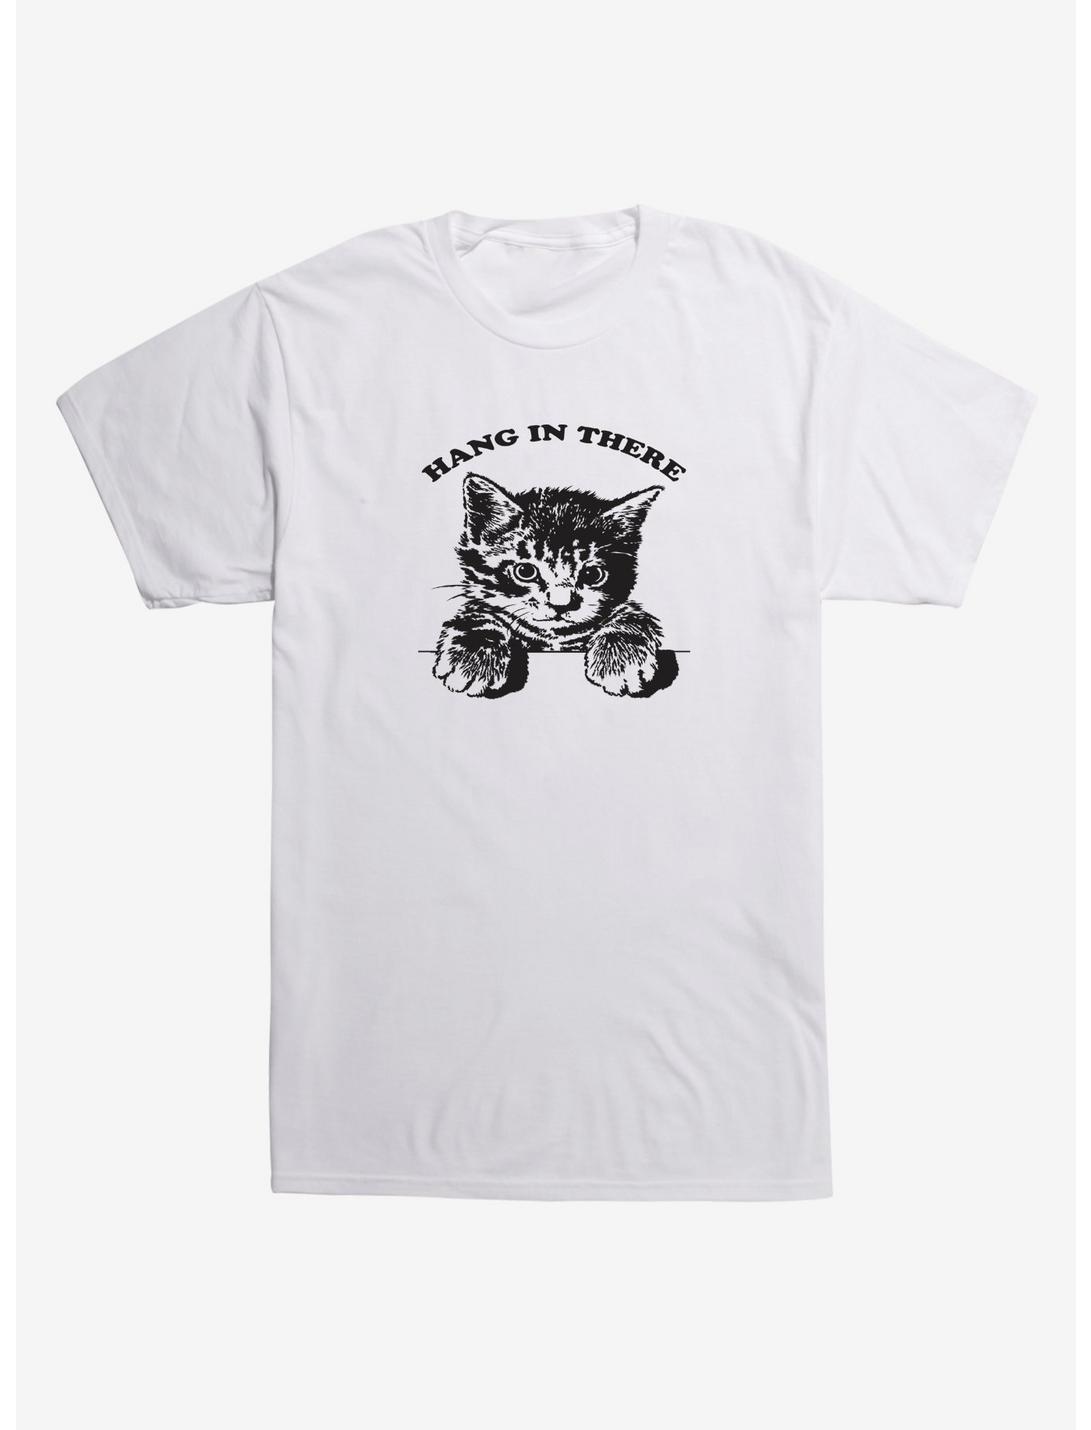 Hang In There Cat T-Shirt, WHITE, hi-res